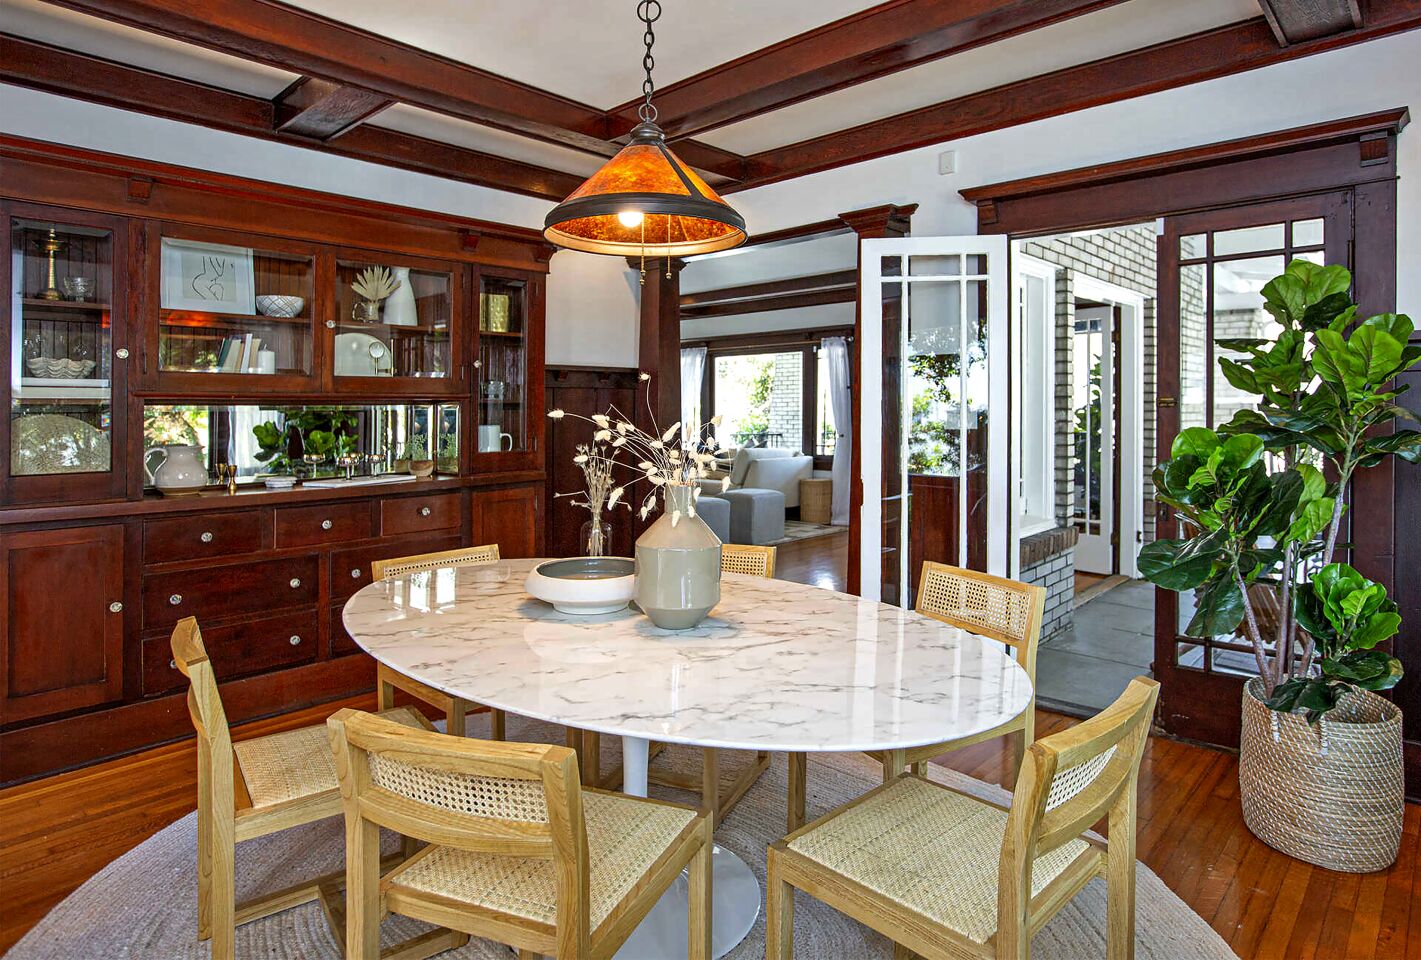 Will Forte penned the first episode of his sitcom "The Last Man on Earth" in the dining room of this 1913 Craftsman.